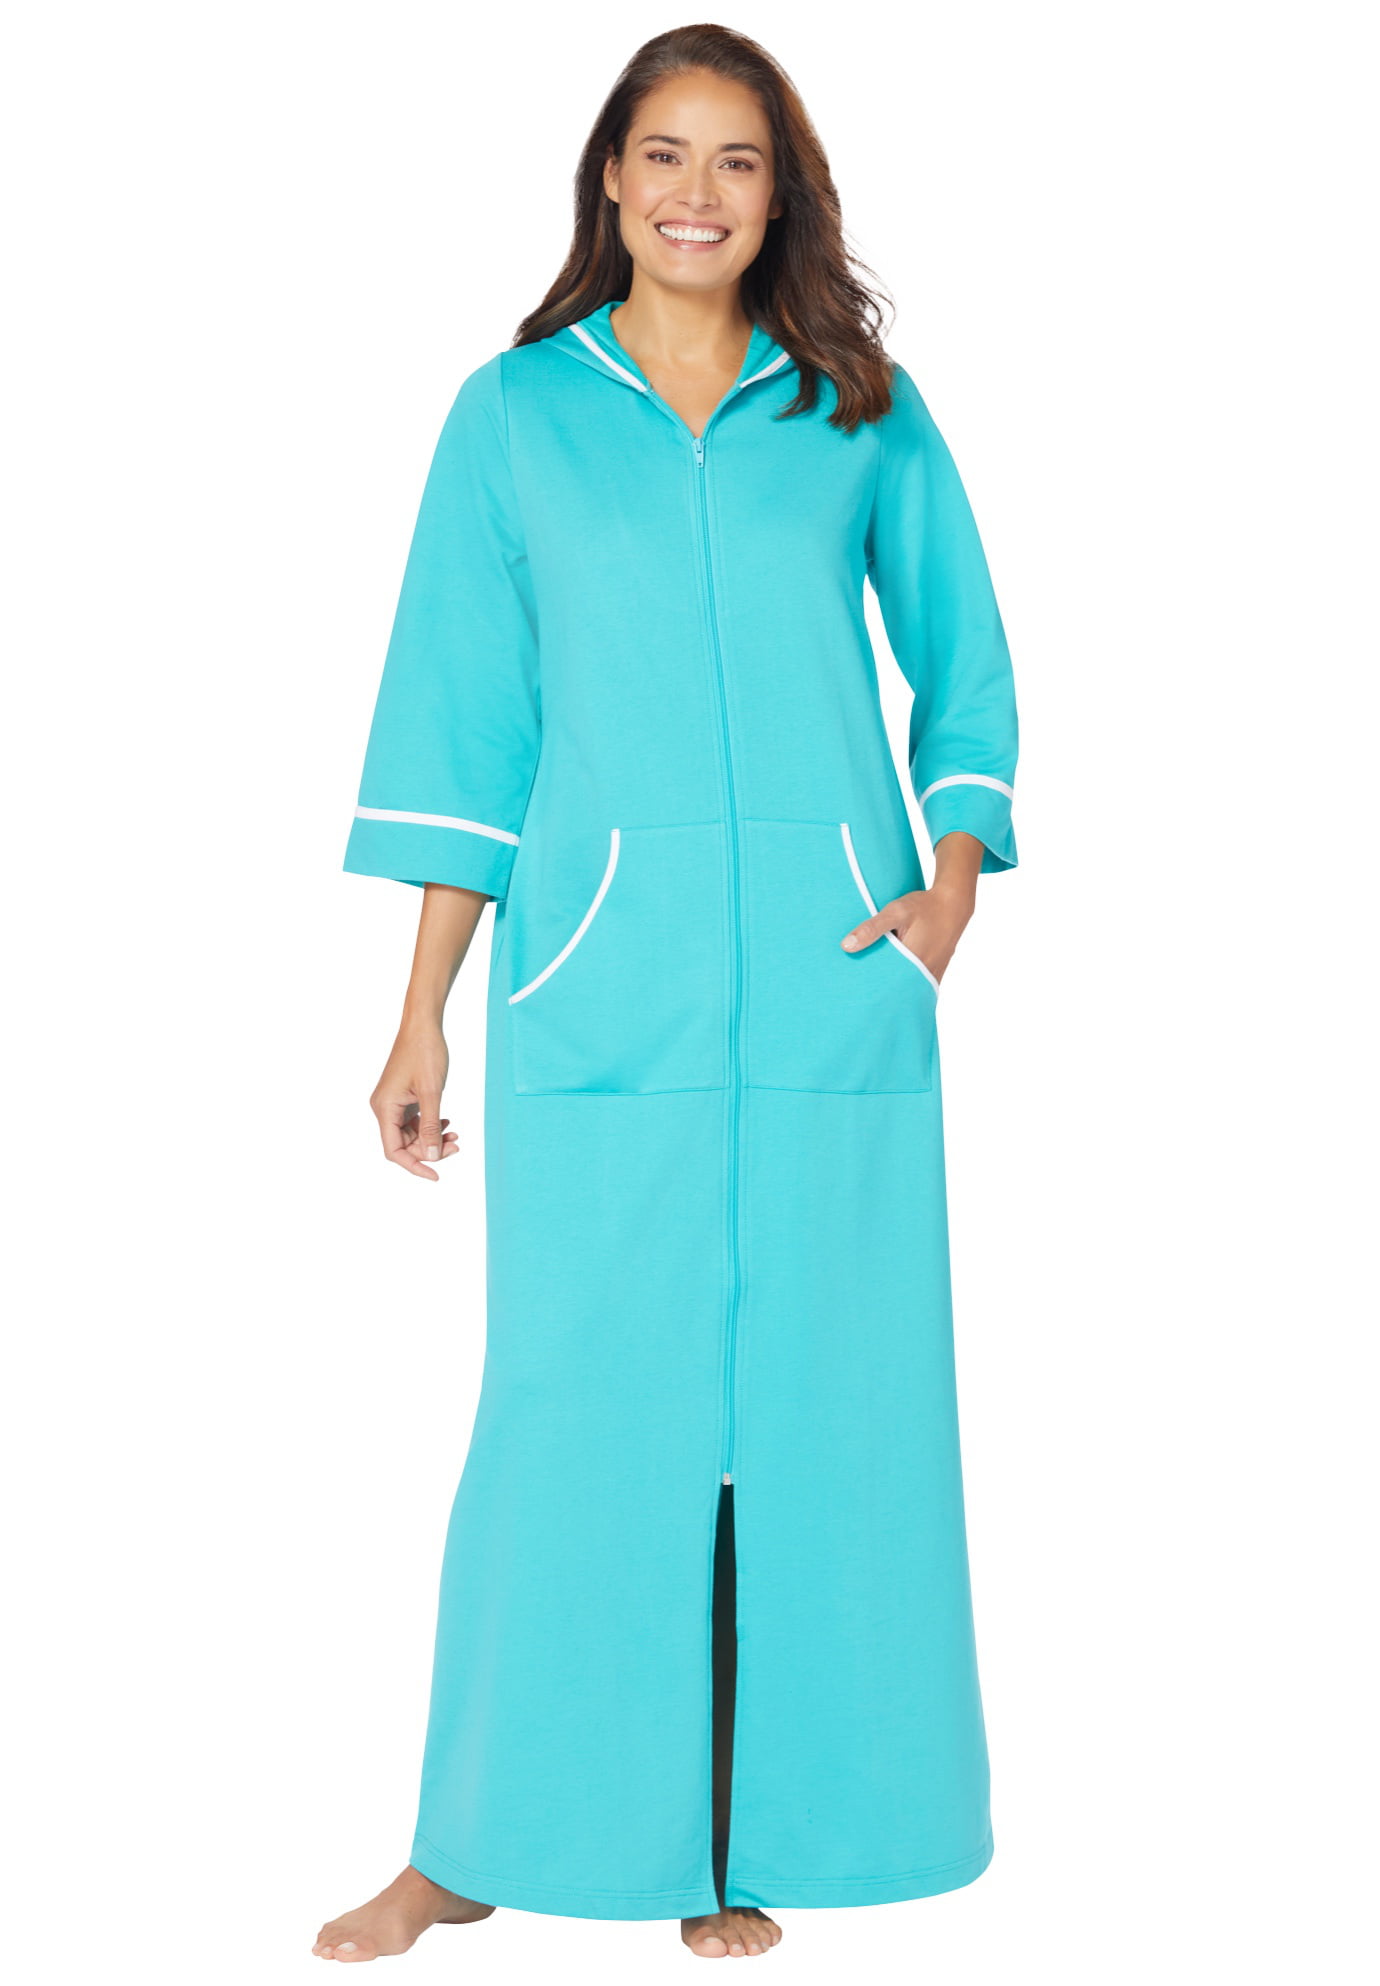 Womens Plus Size Short Hooded Robe Dreams & Co 